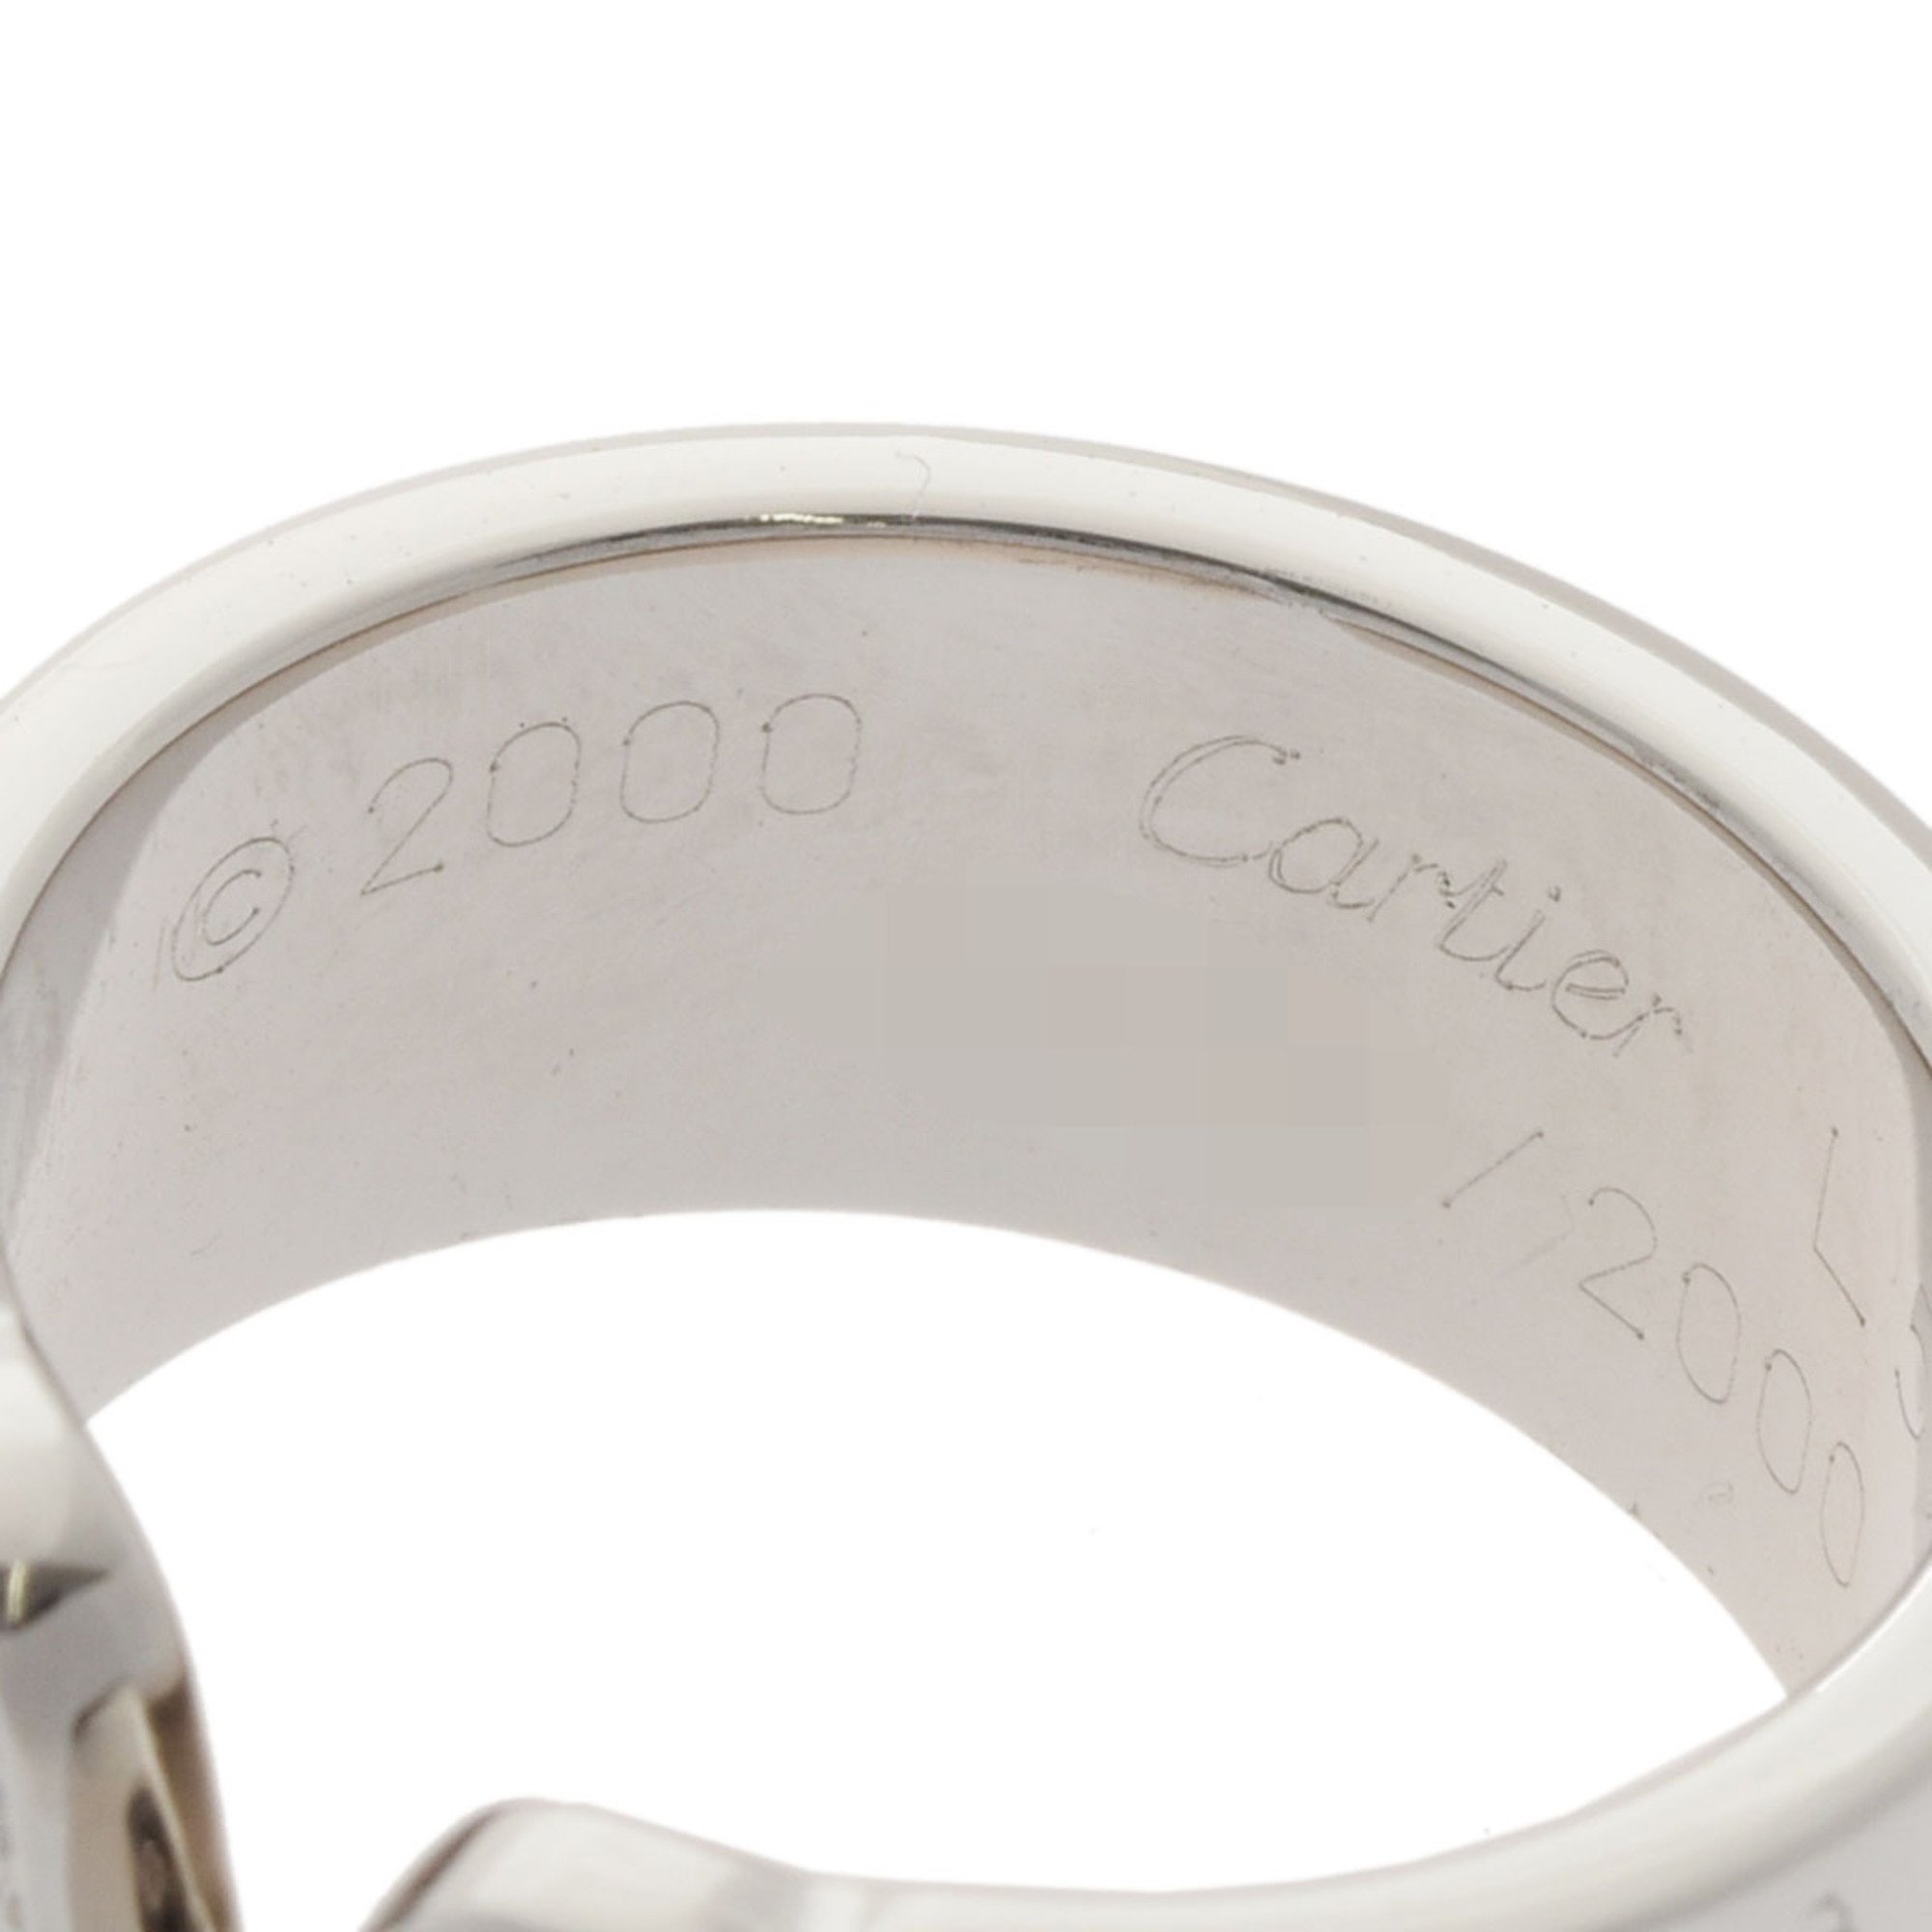 CARTIER 2C Diamond 2000 Limited Edition #51 - Size 11 Ladies K18 White Gold Ring